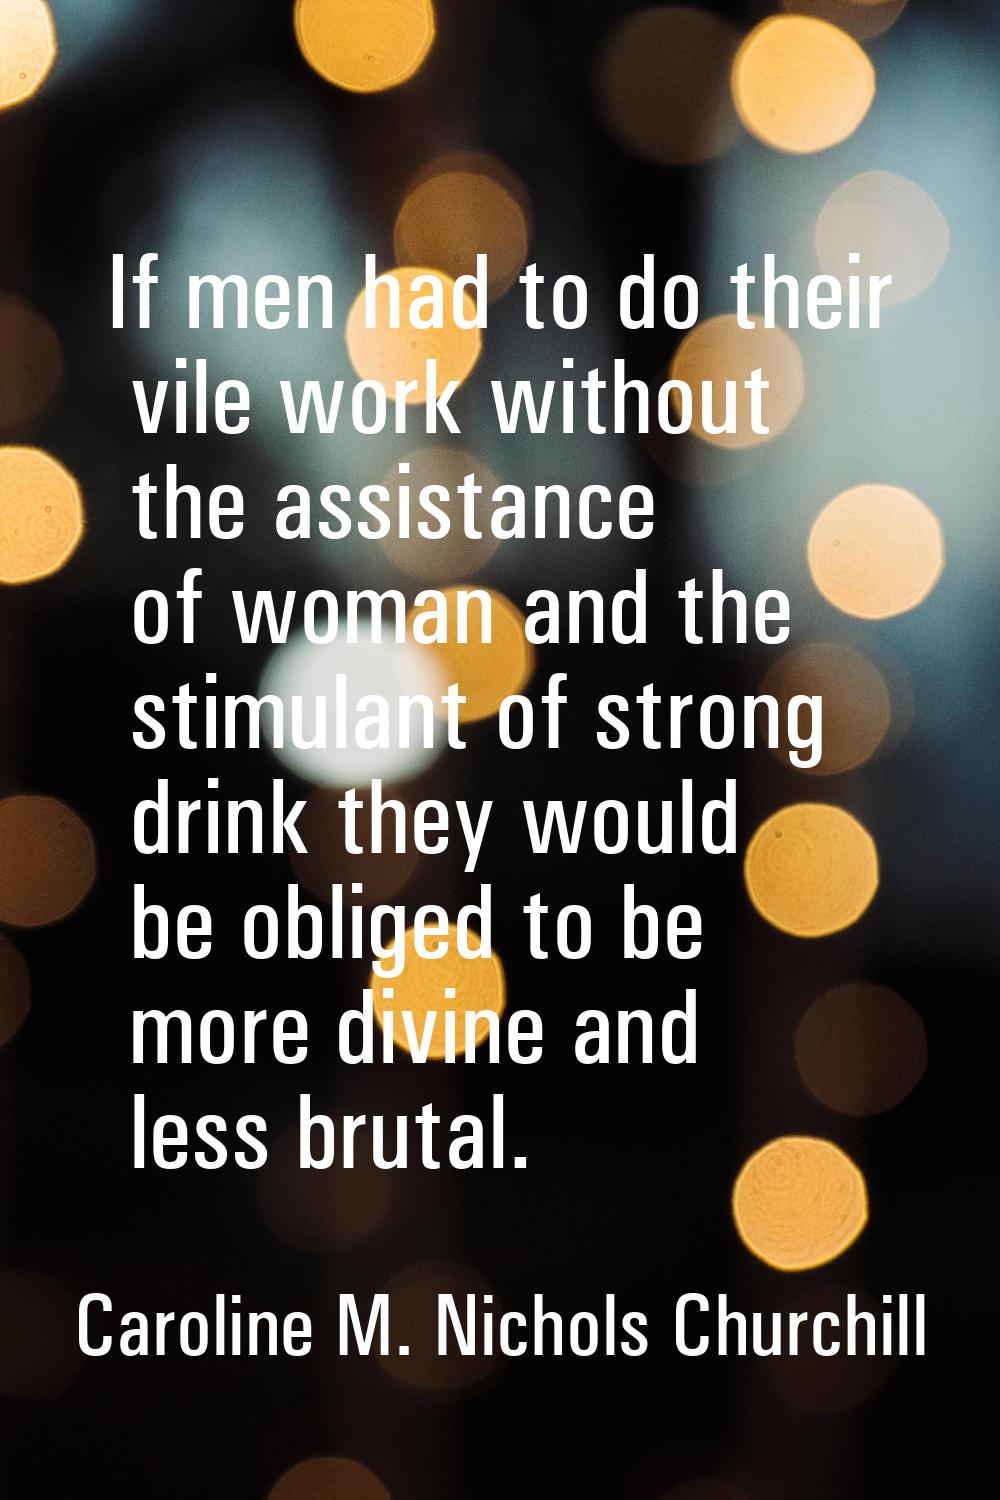 If men had to do their vile work without the assistance of woman and the stimulant of strong drink 